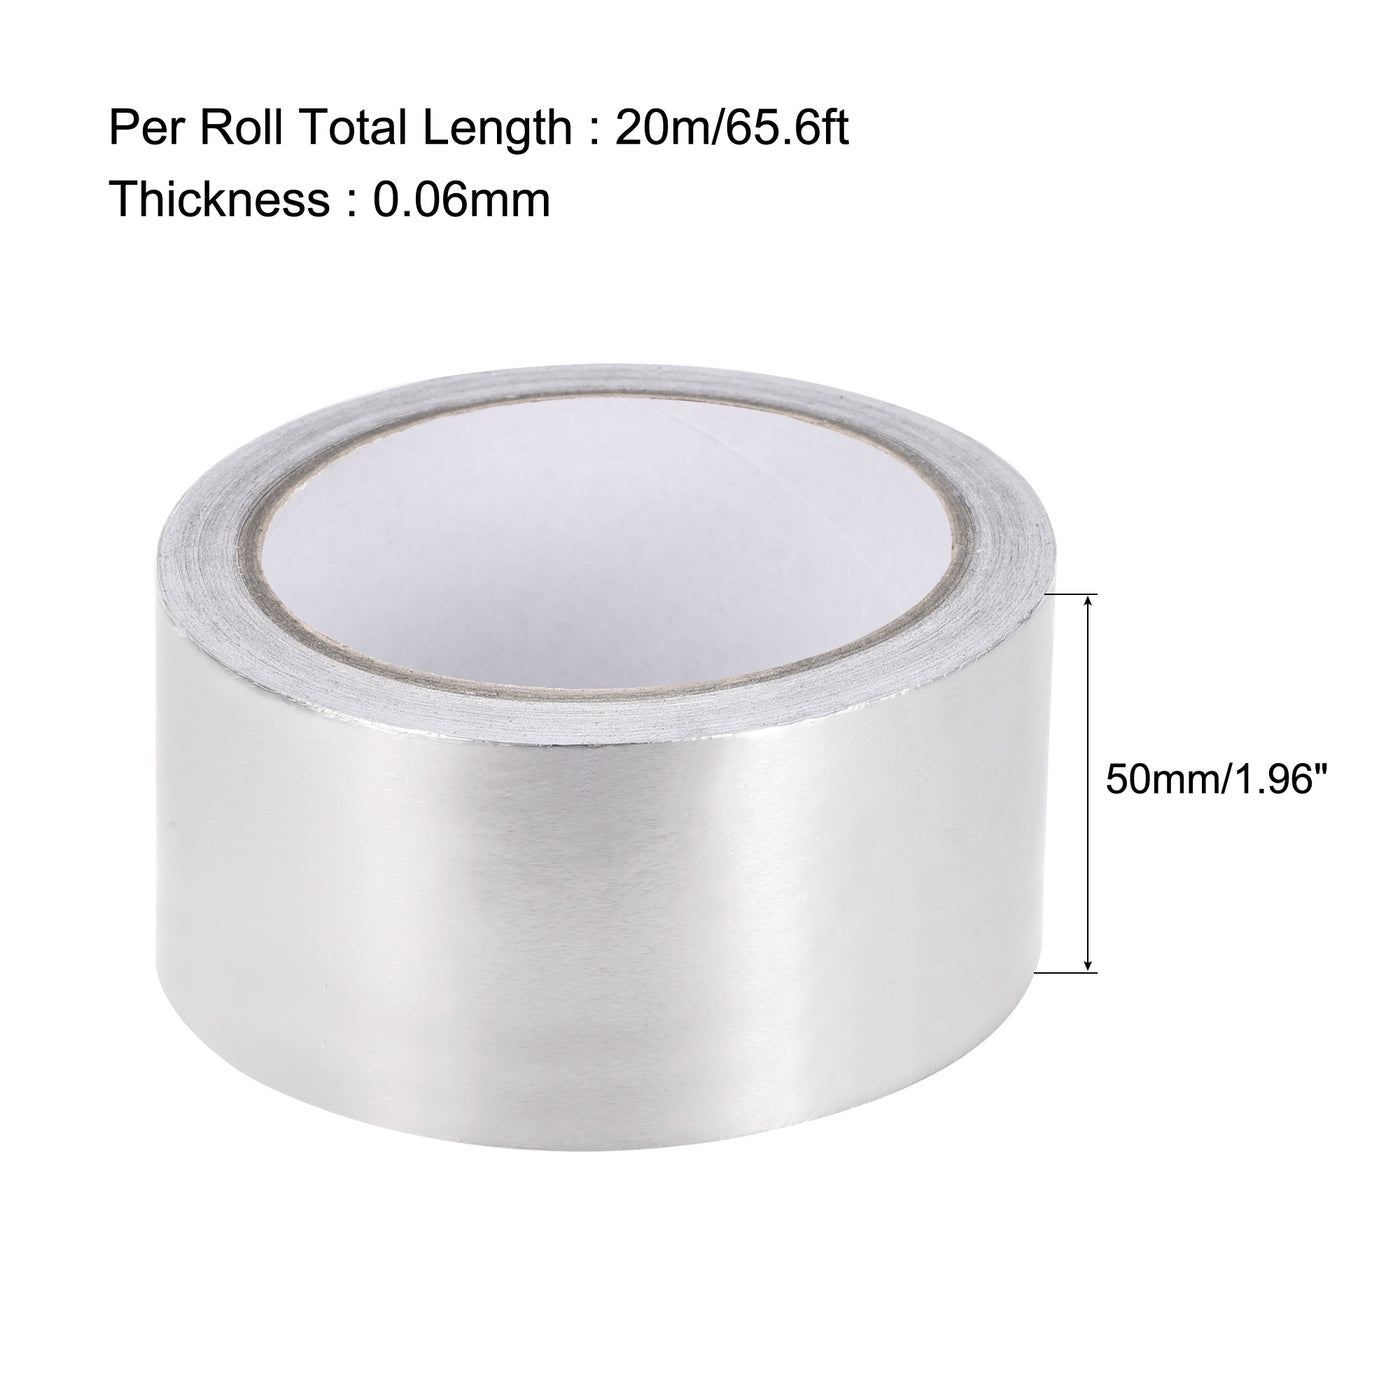 uxcell Uxcell 50mm Aluminum Foil Tape High Temperature Tape for HVAC, Sealing, Patching Hot and Cold Air Ducts Single Sided Adhesive Tape 20m/65ft